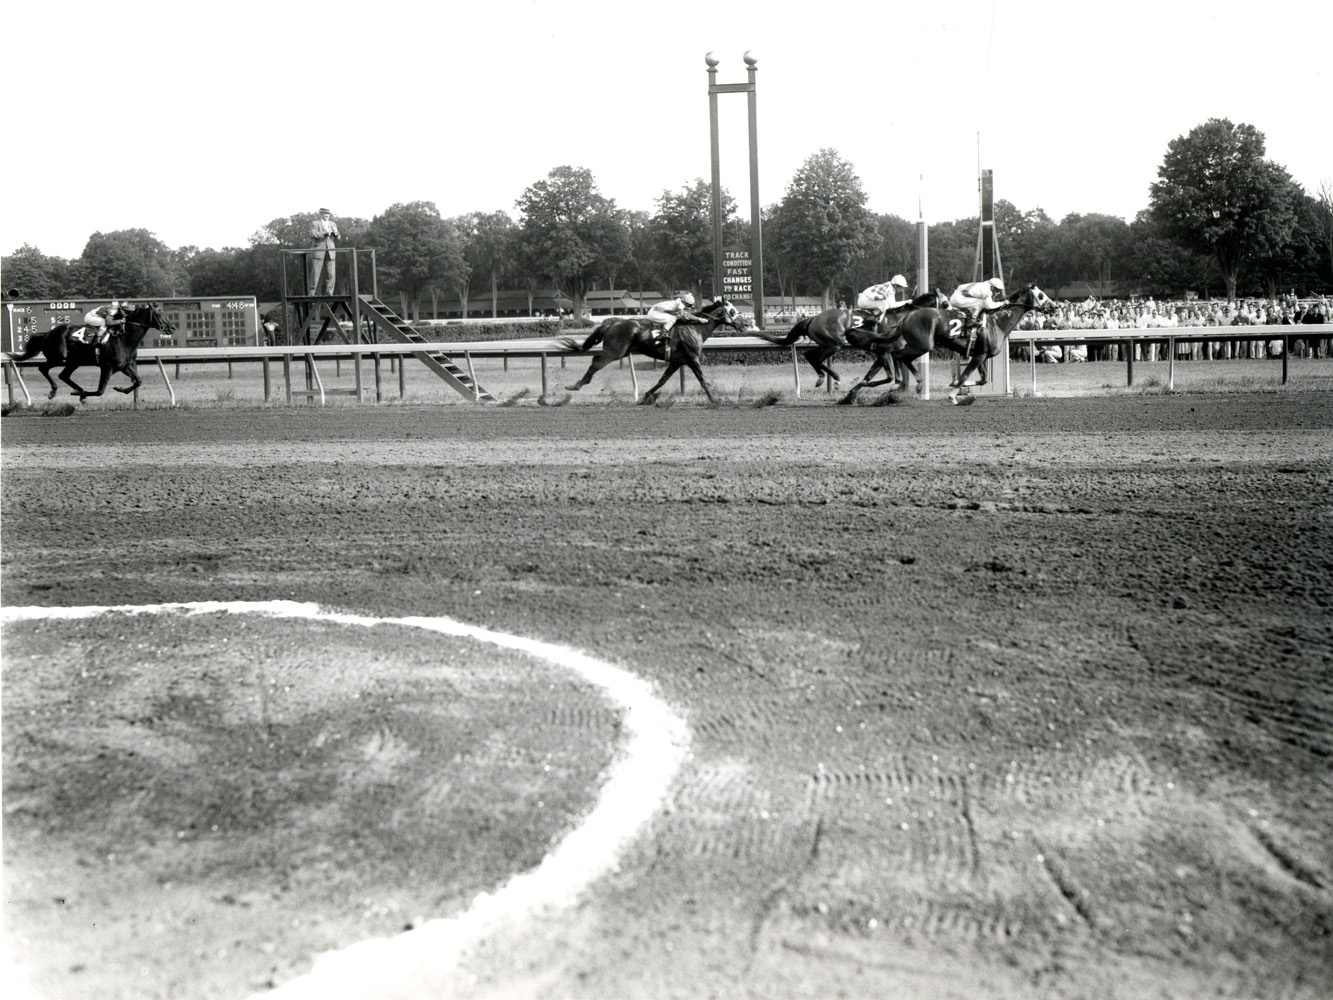 Sword Dancer (Manuel Ycaza up) winning the 1959 Travers at Saratoga (Keeneland Library Morgan Collection/Museum Collection)